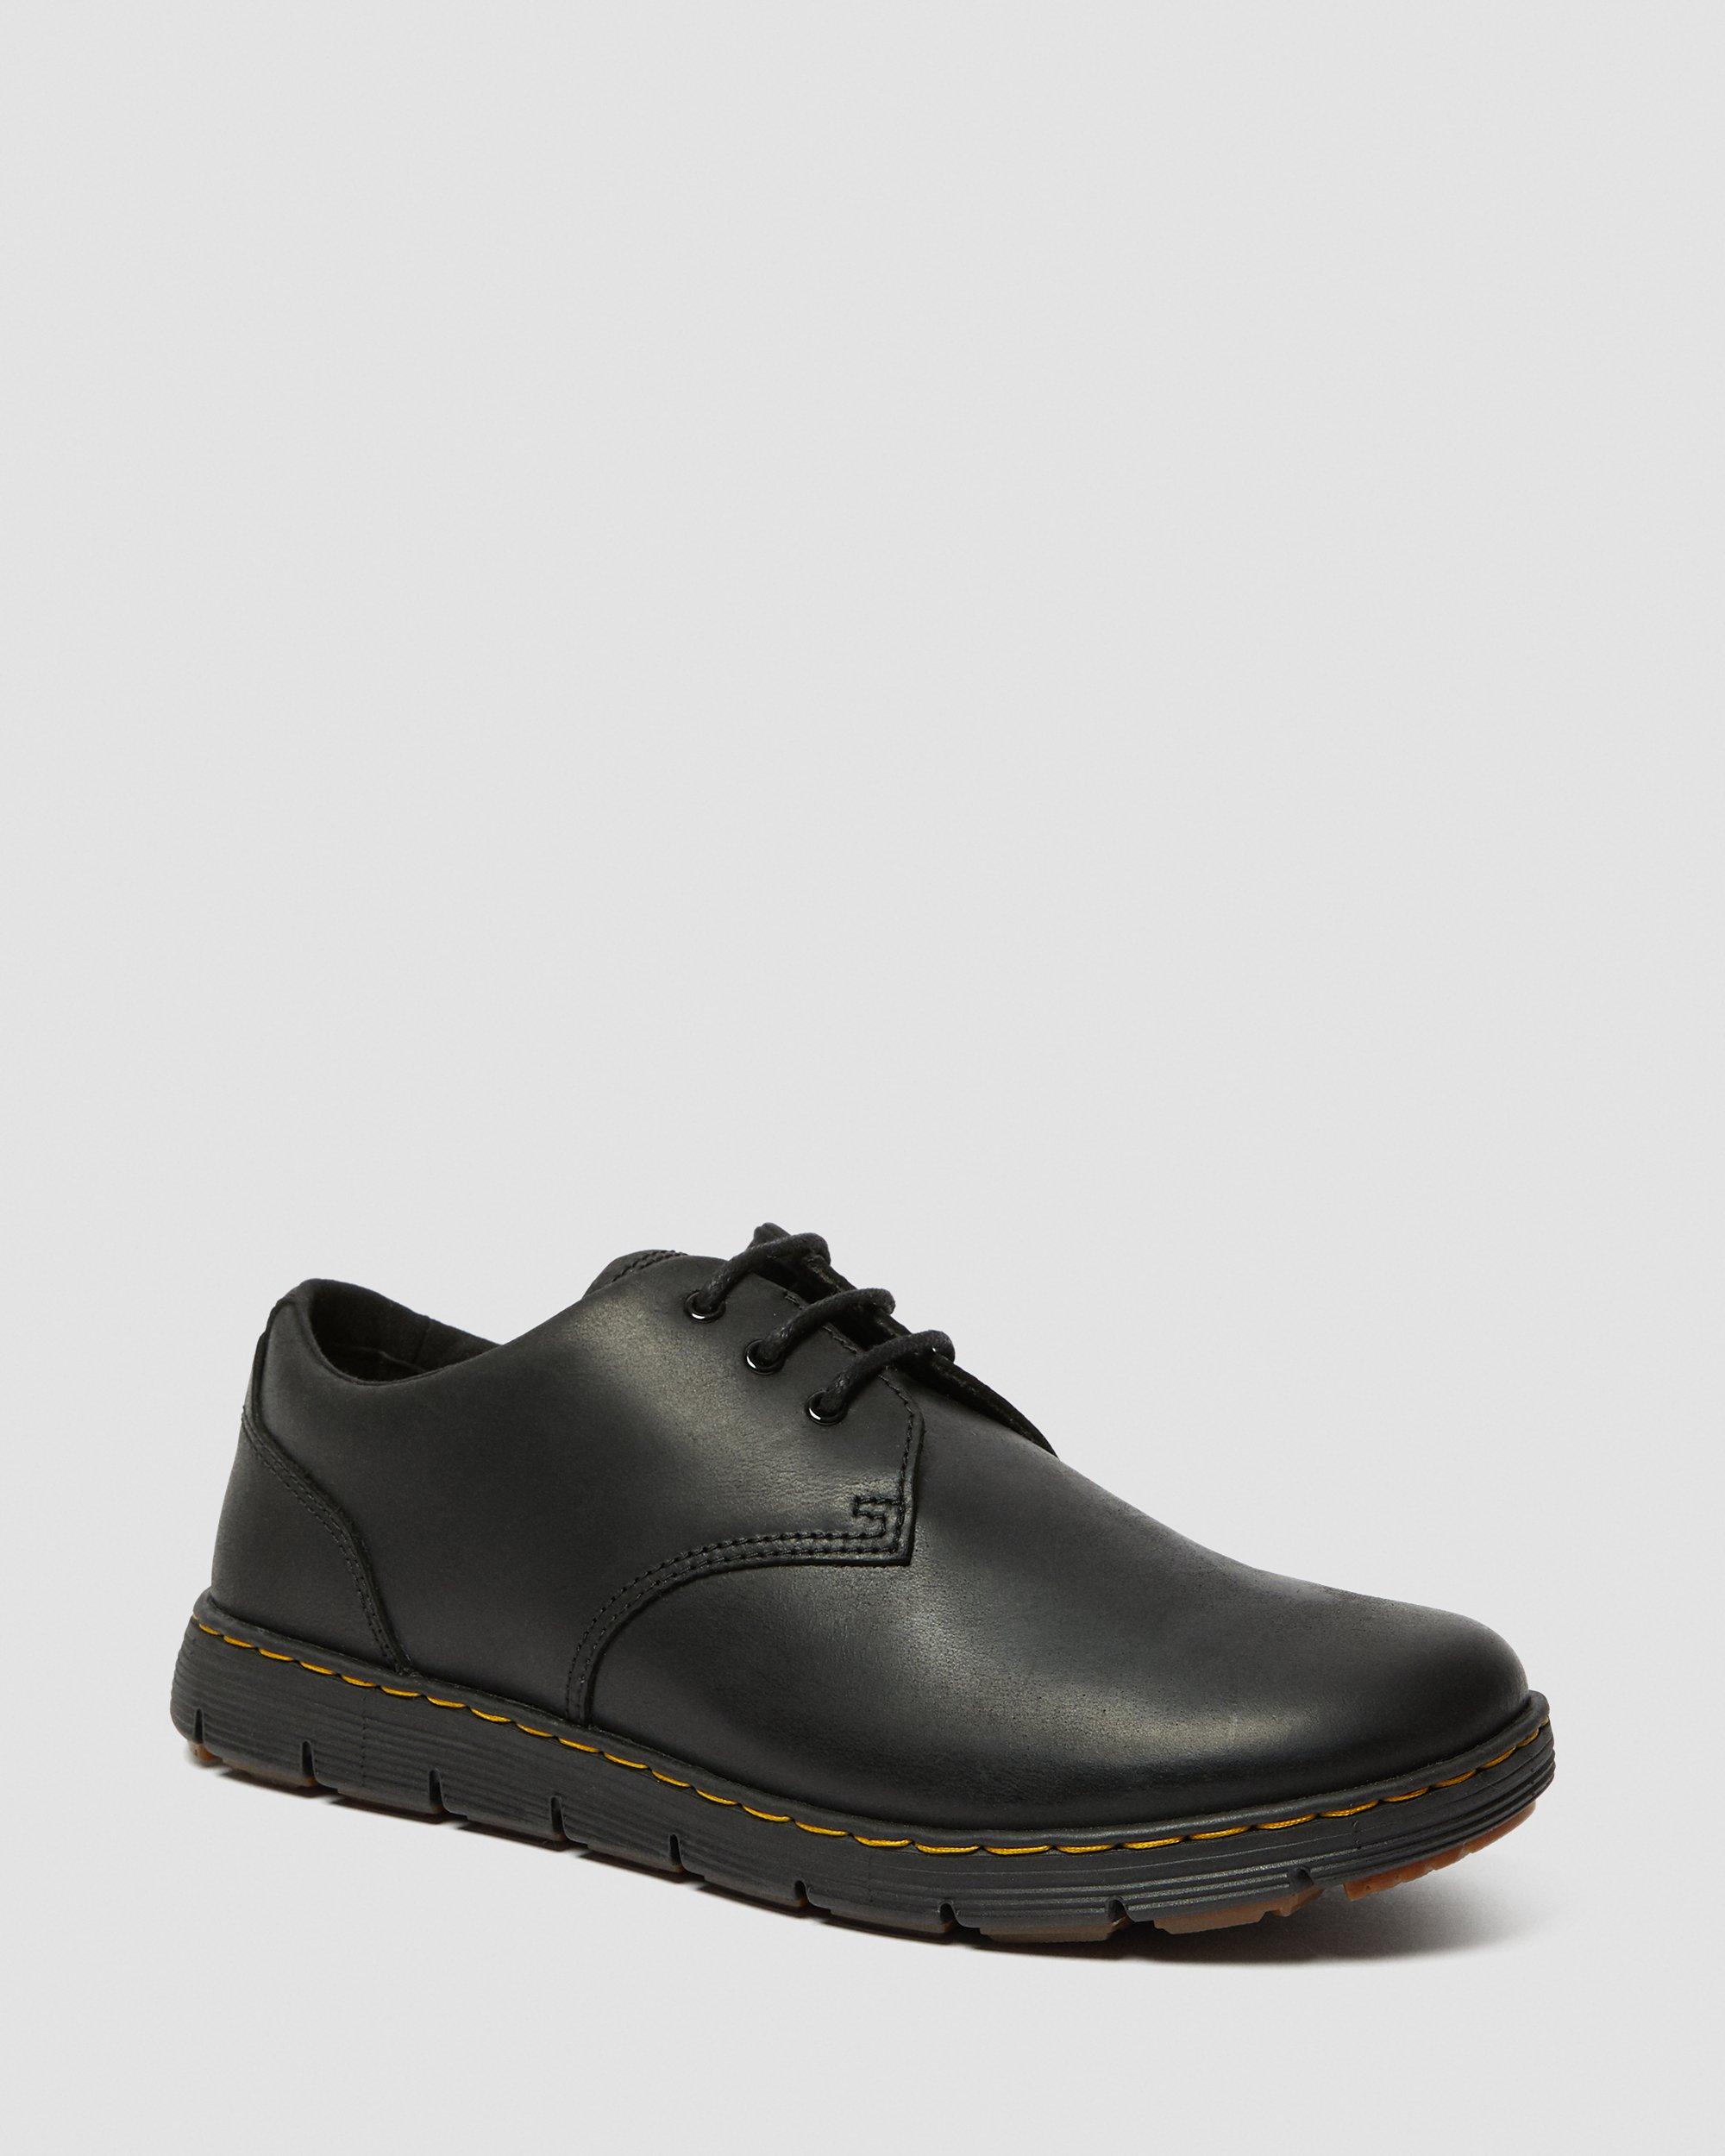 Rhodes Men's Leather Casual Shoes in Black | Dr. Martens